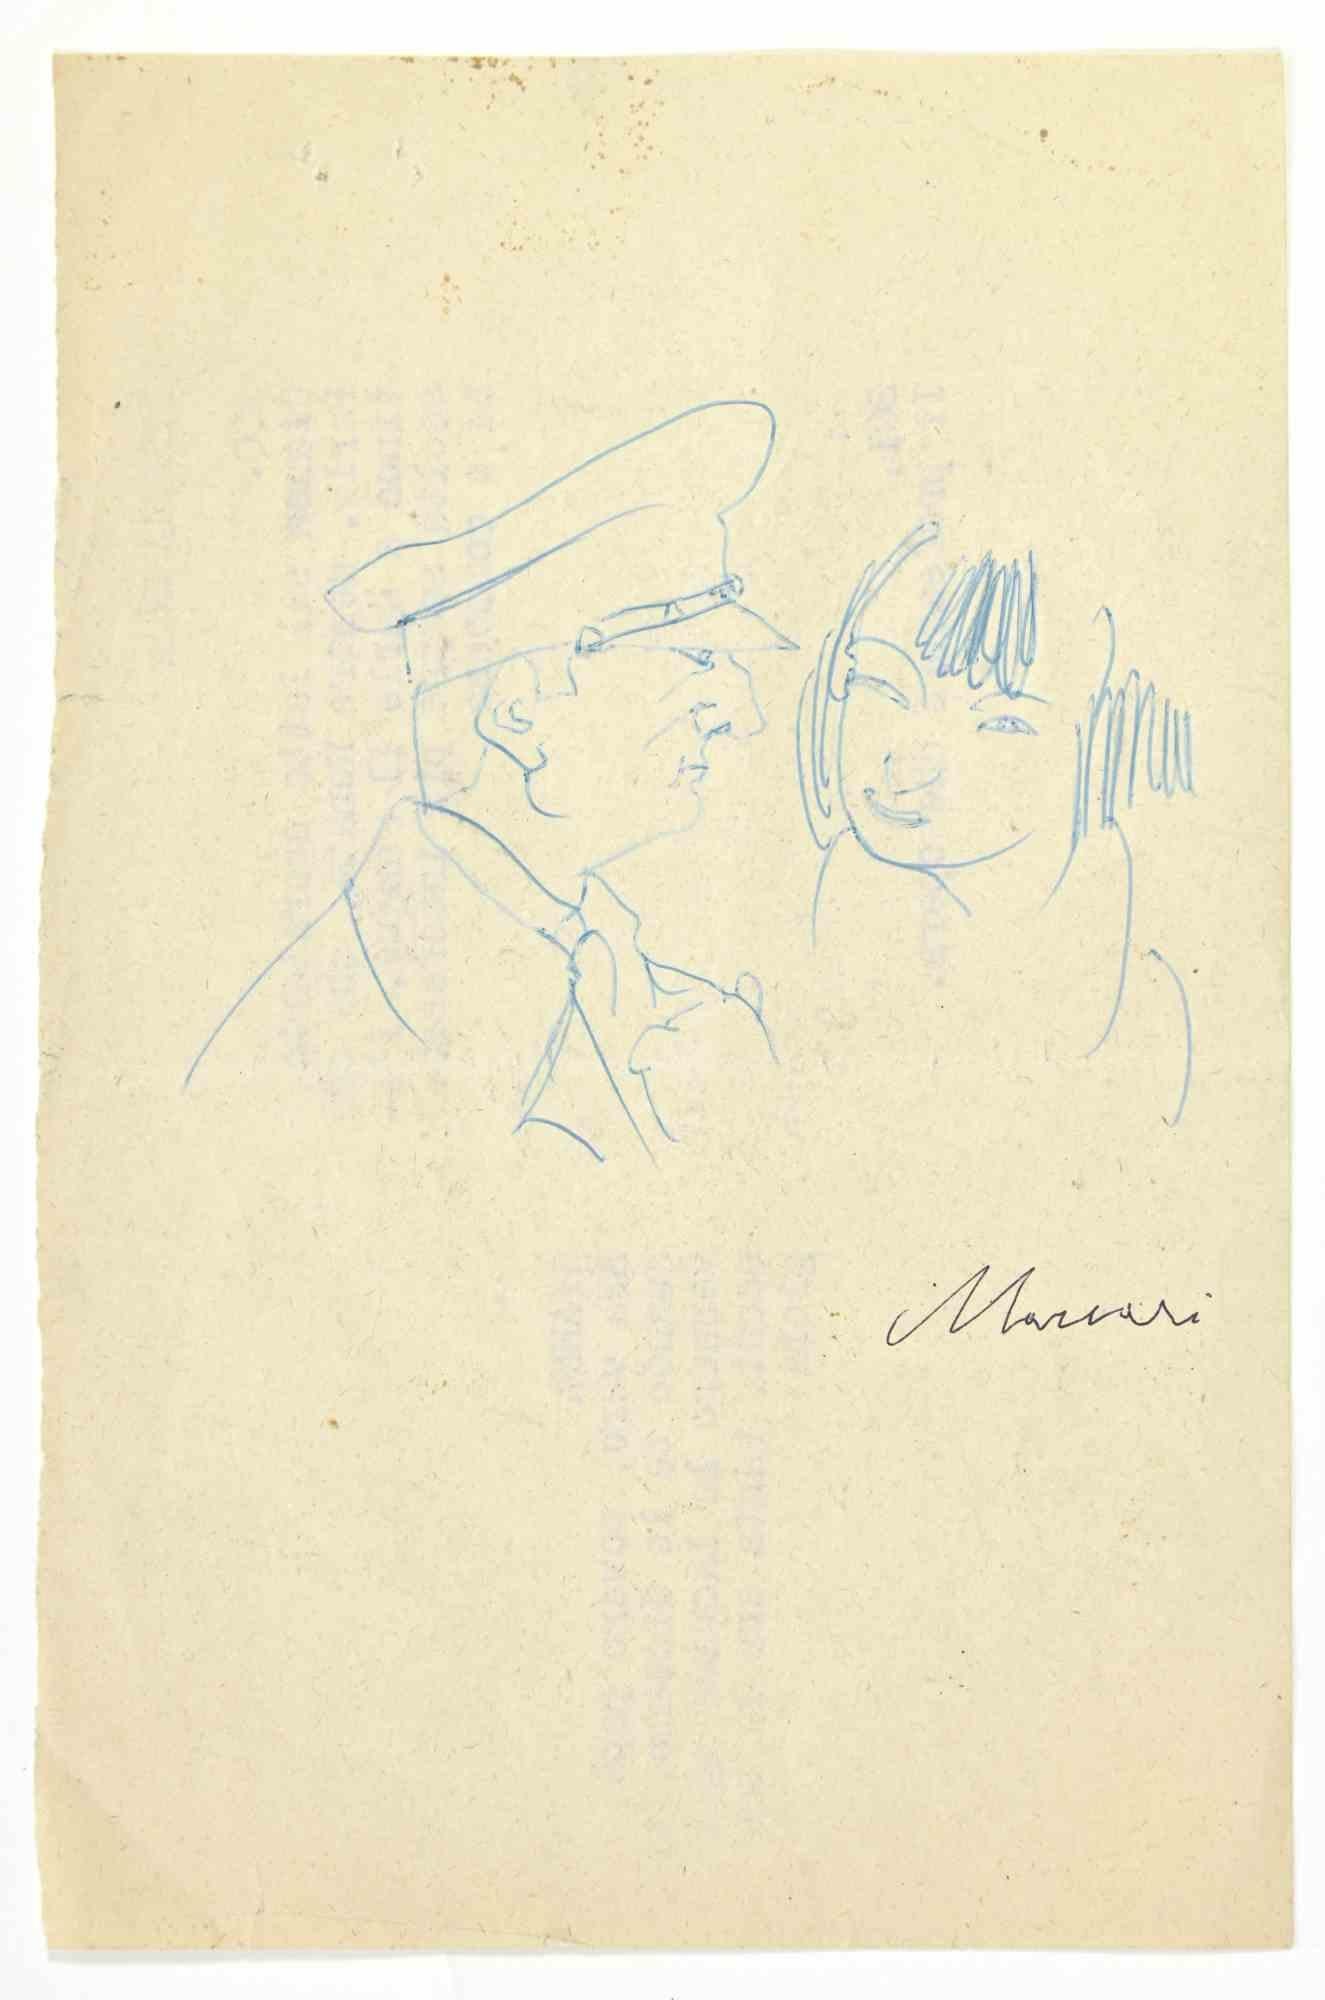 General and Girl is a pen Drawing realized by Mino Maccari  (1924-1989) in 1947 ca

Hand-signed on the lower.

Good condition, with slight folding.

Mino Maccari (Siena, 1924-Rome, June 16, 1989) was an Italian writer, painter, engraver and